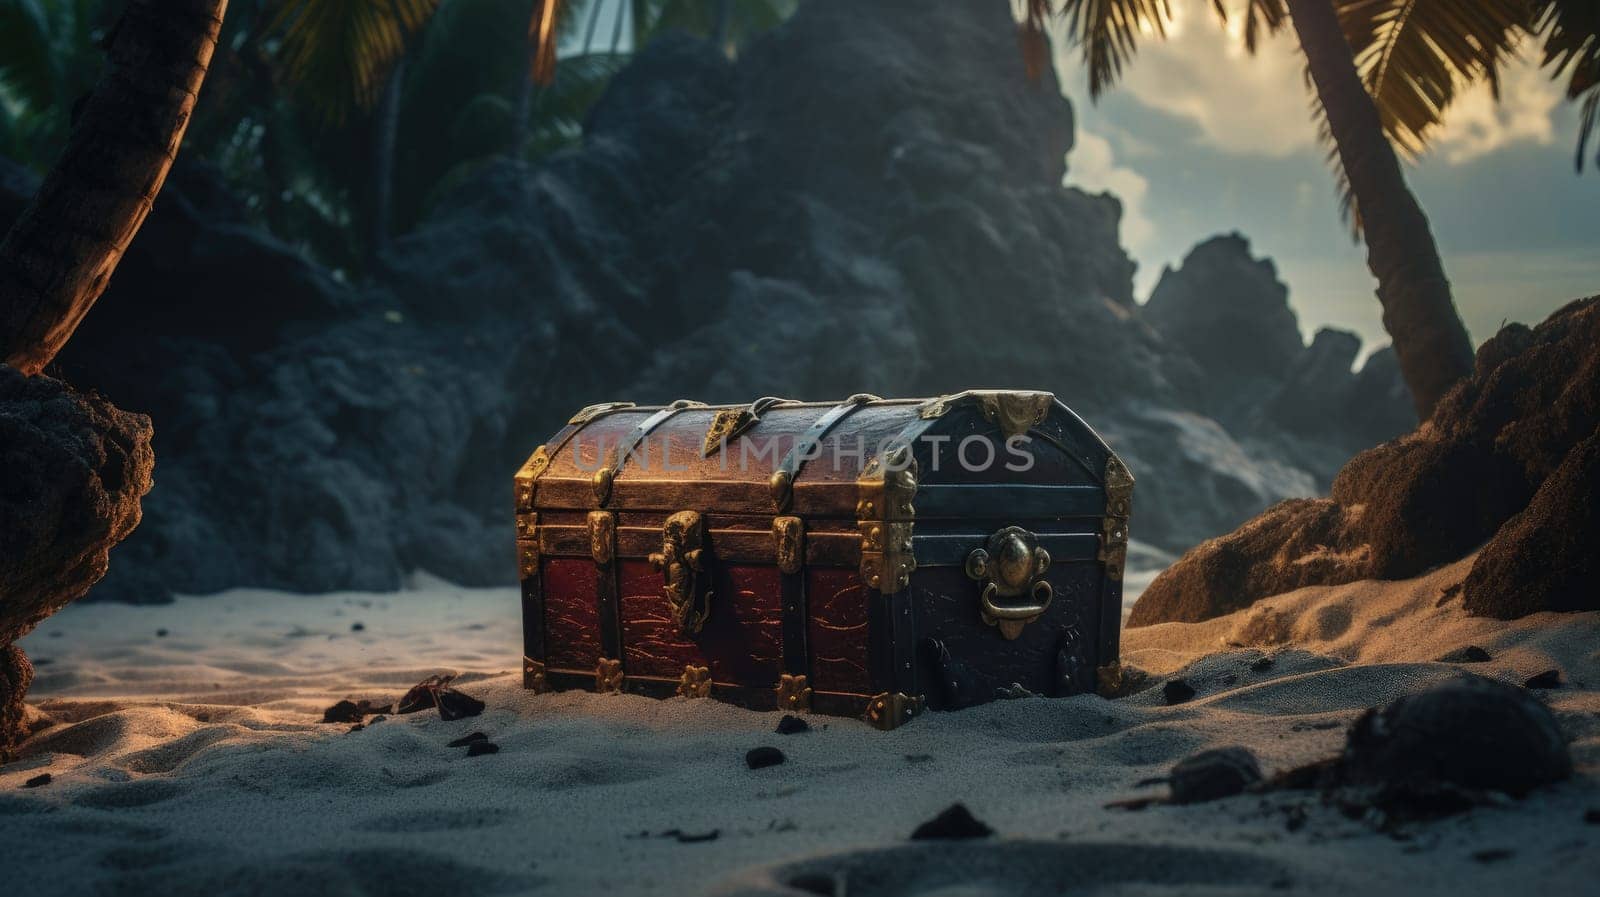 A pirate treasure chest, partially buried in a sands of a deserted island